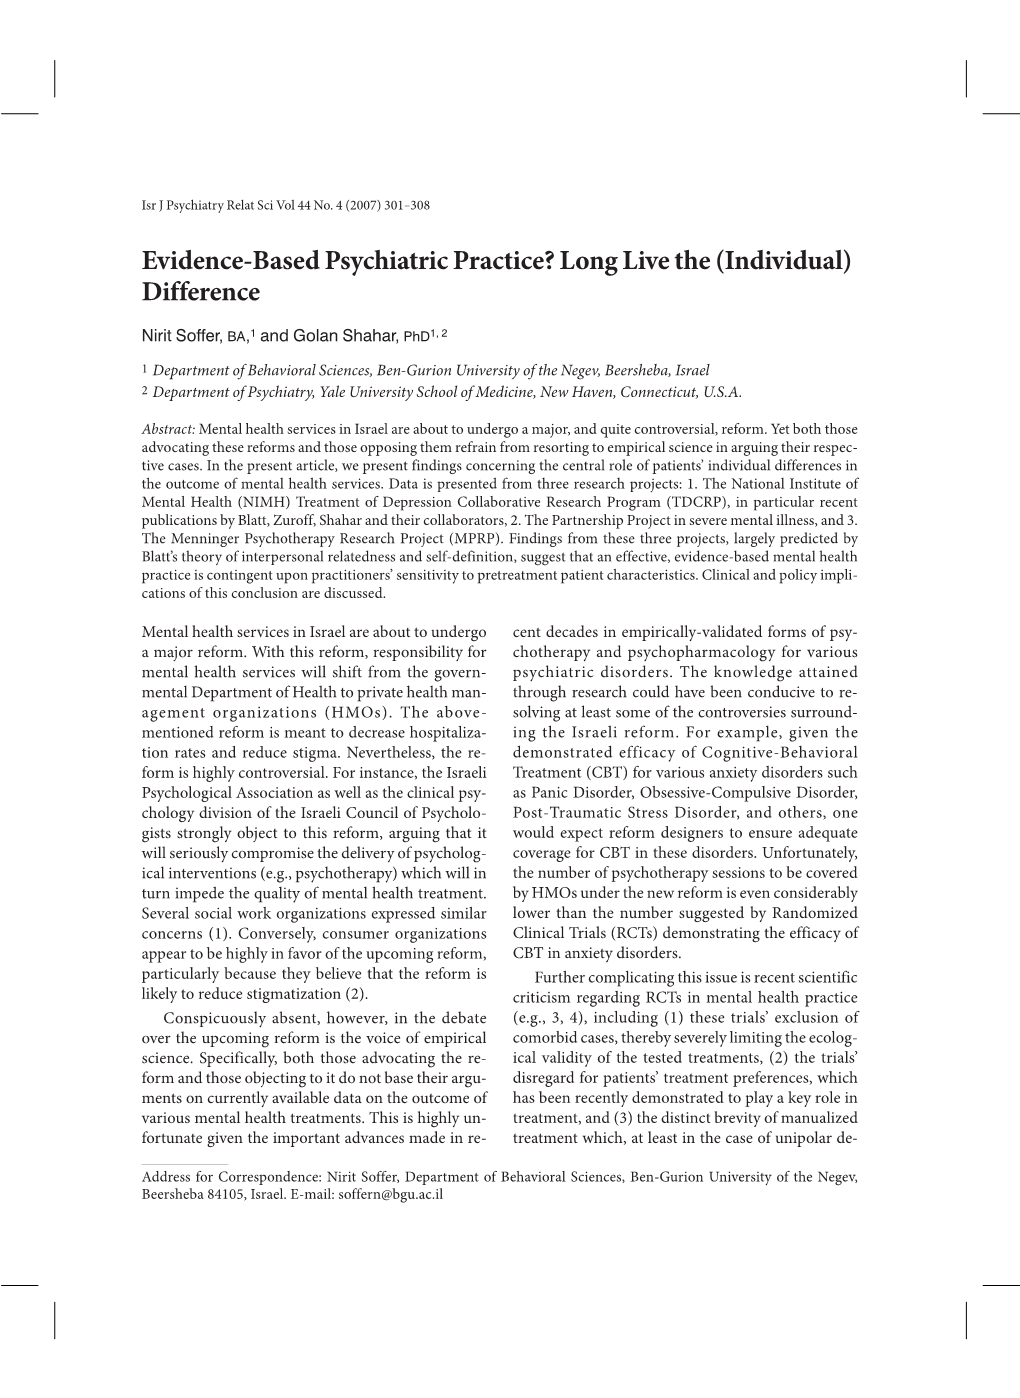 Evidence-Based Psychiatric Practice? Long Live the (Individual) Difference